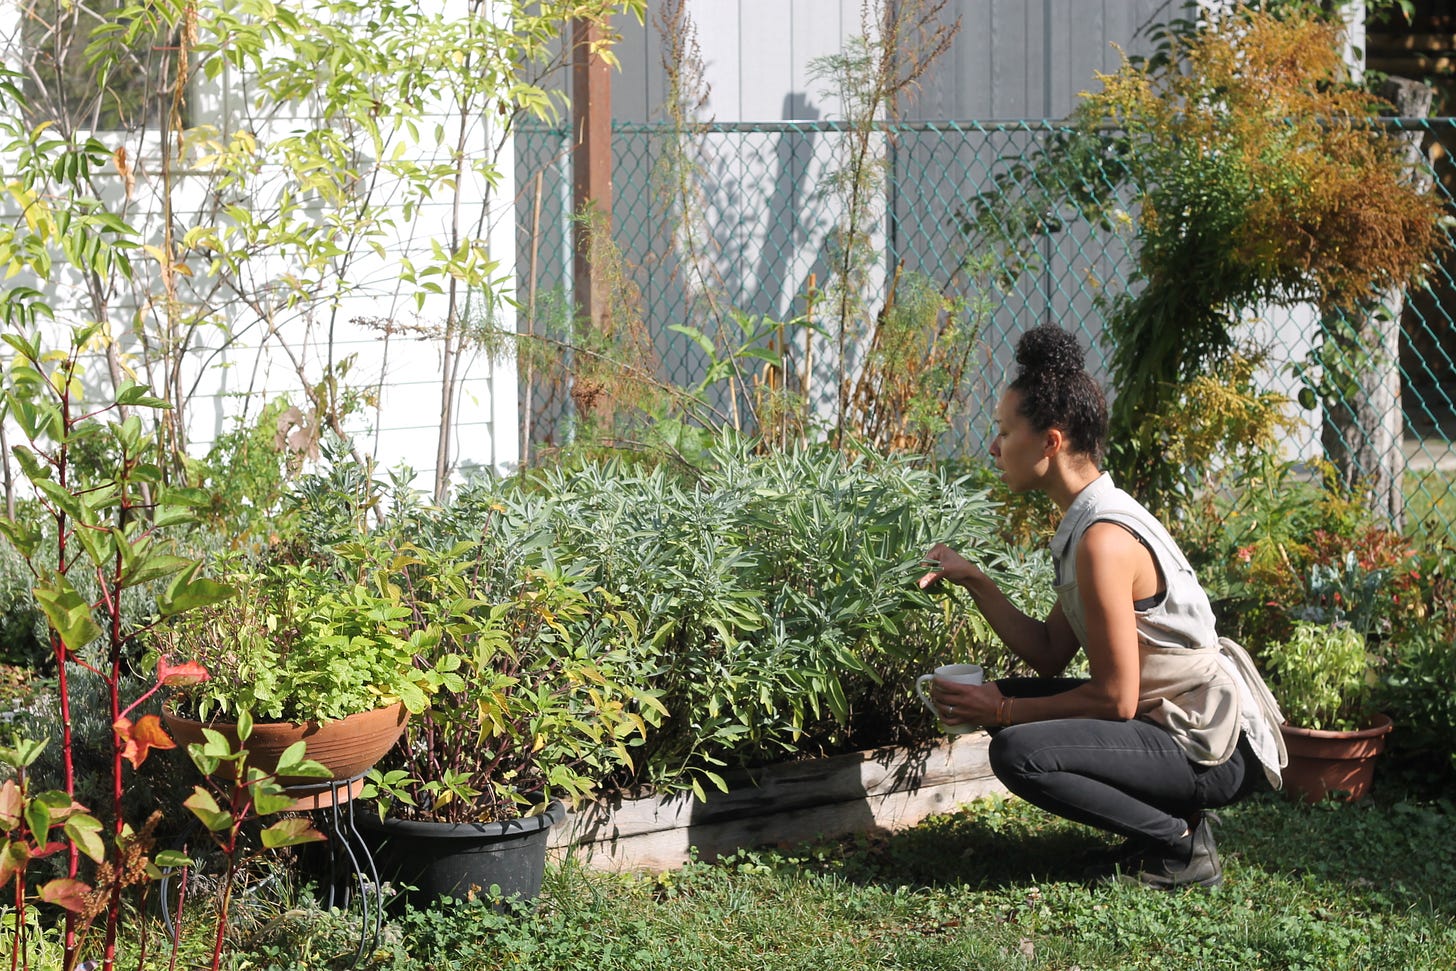 A middle-aged Black woman with a bun squats in front of a foot-high raised wooden bed. She is touching a cluster of sage plants. 